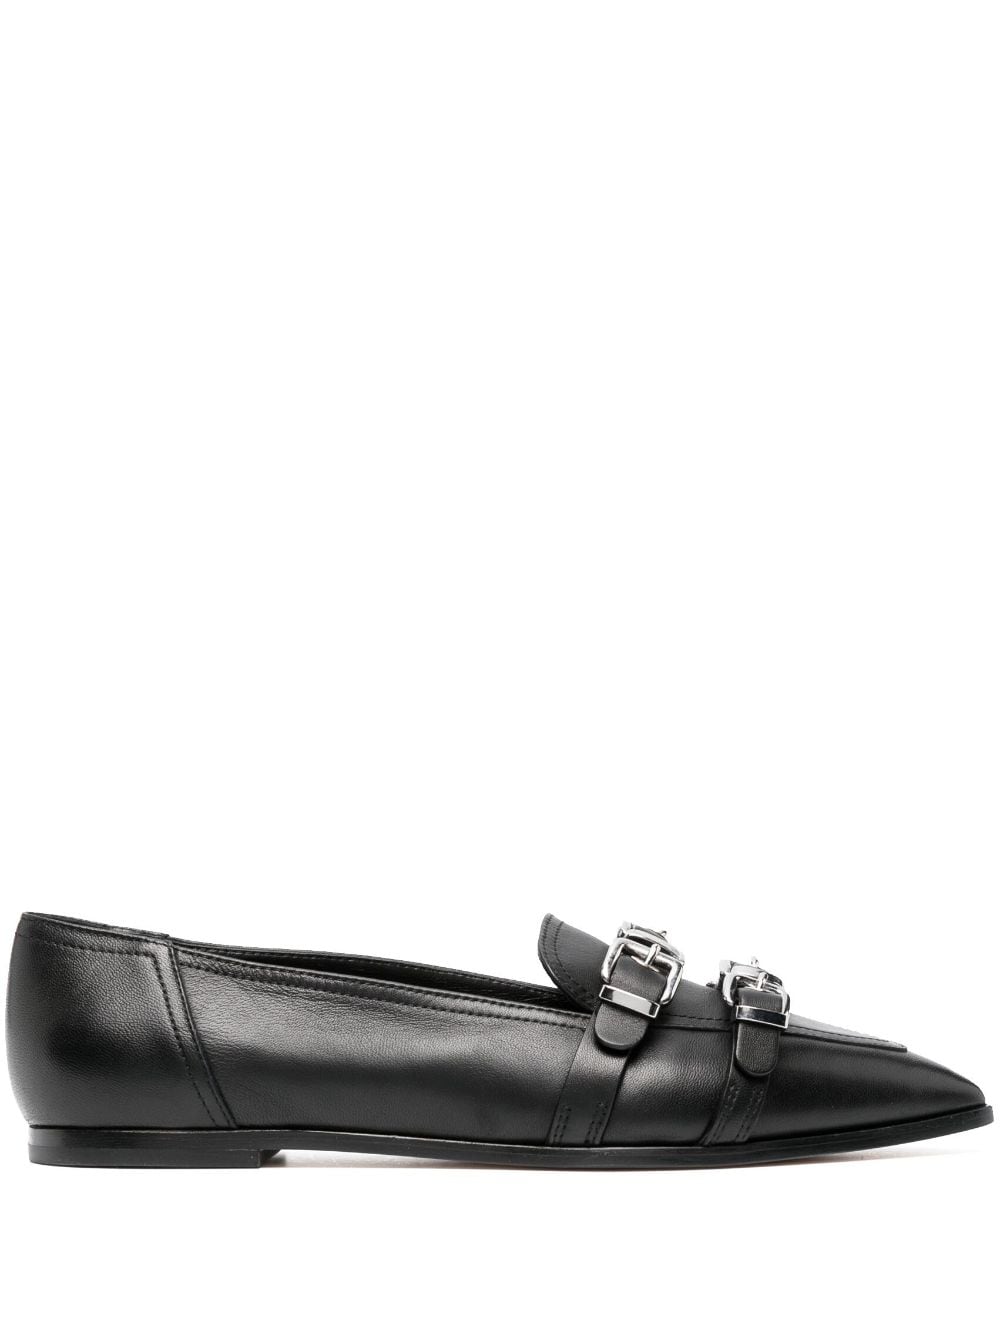 AGL buckle-detail pointed-top loafers